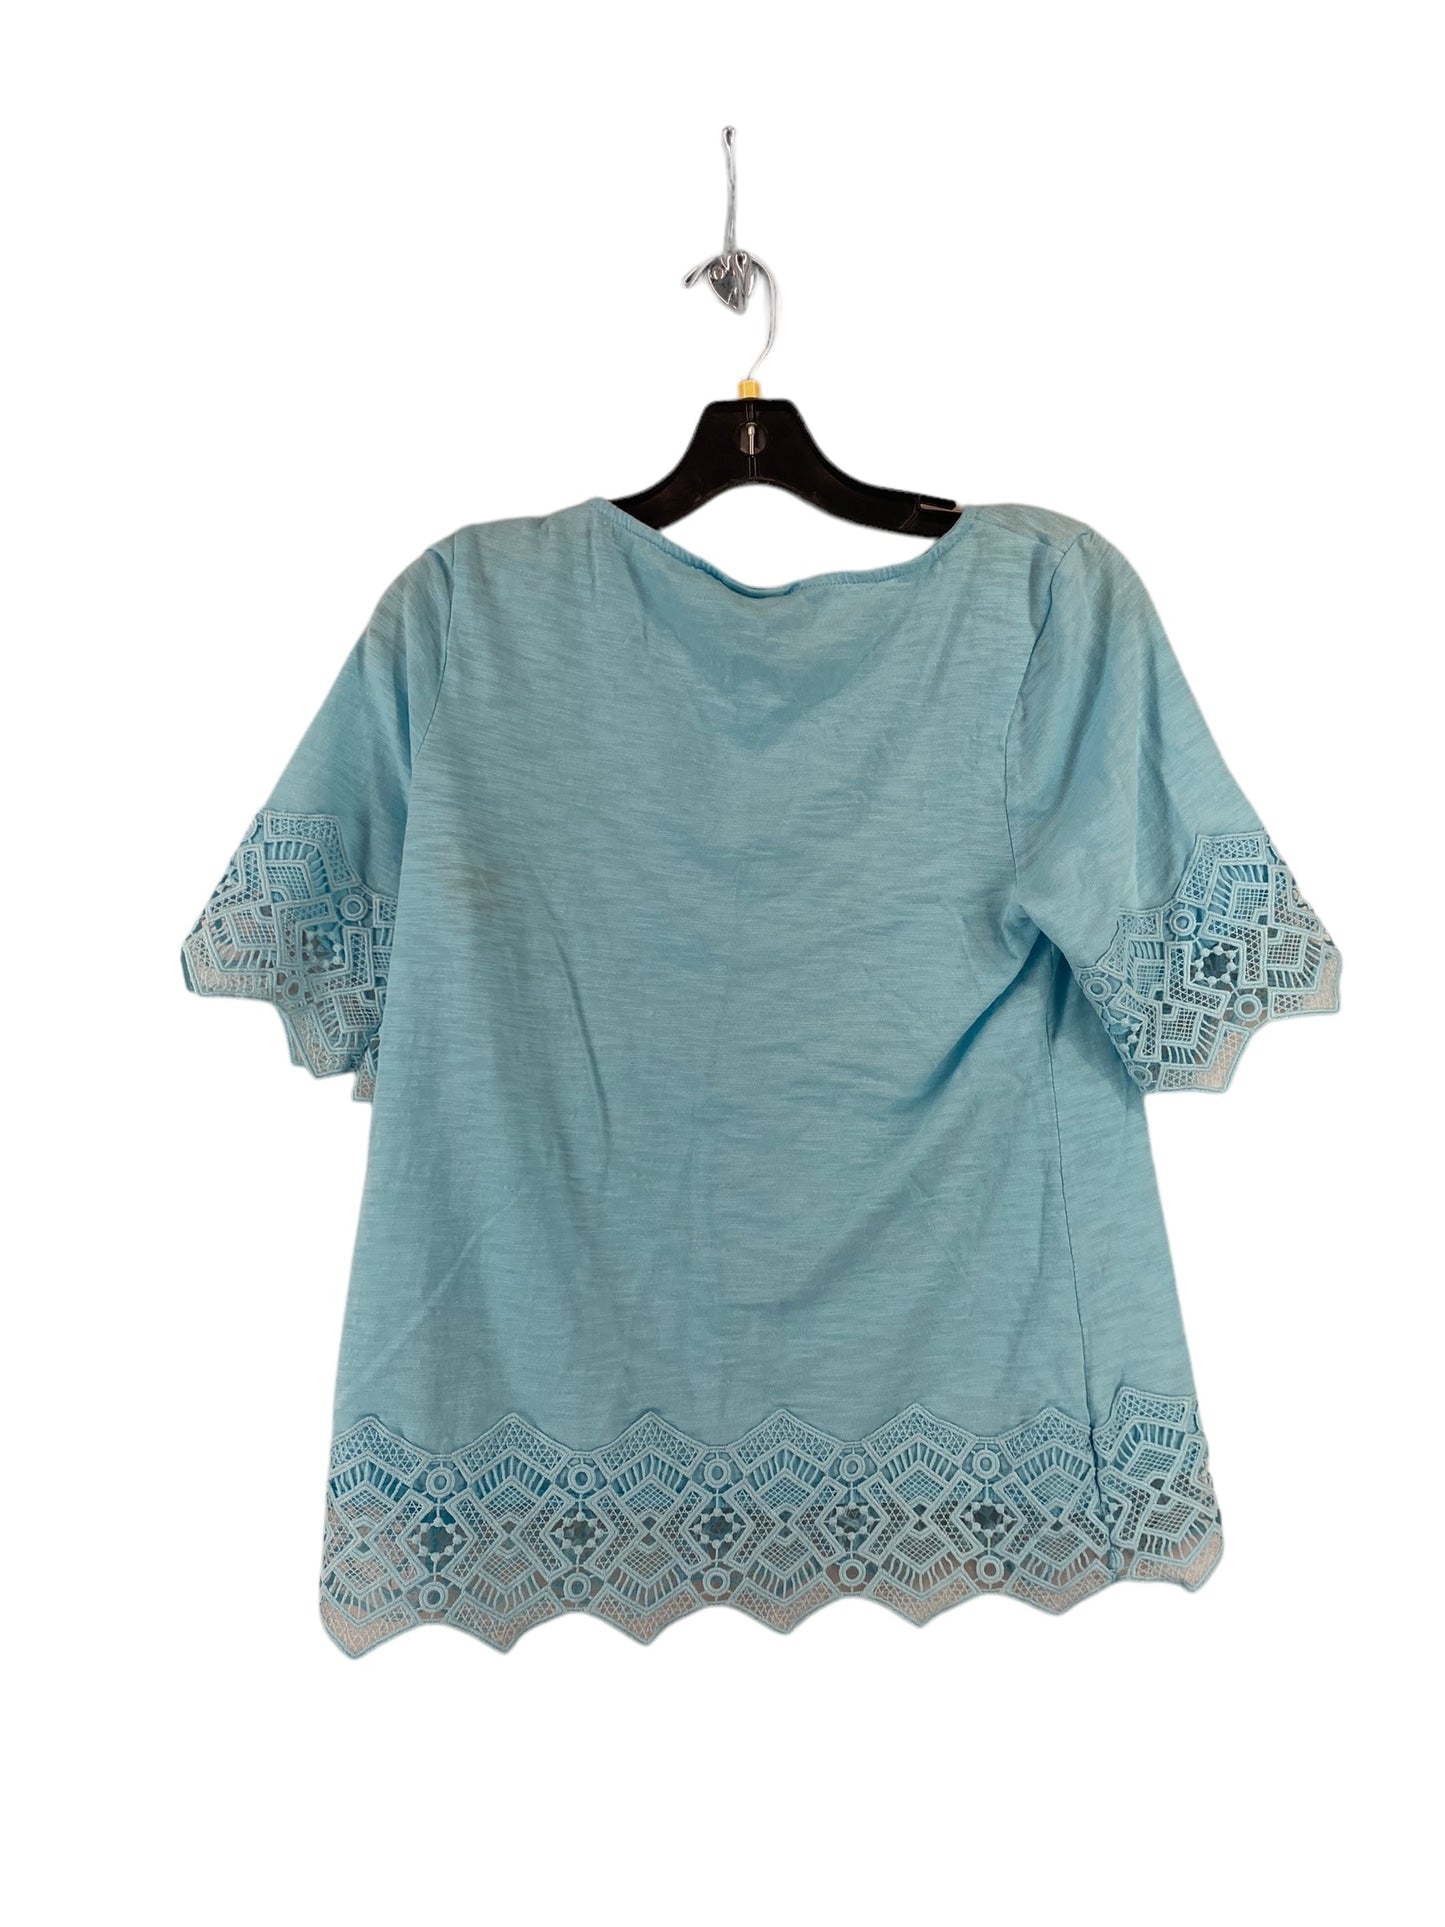 Blue Top Short Sleeve Chicos, Size 0